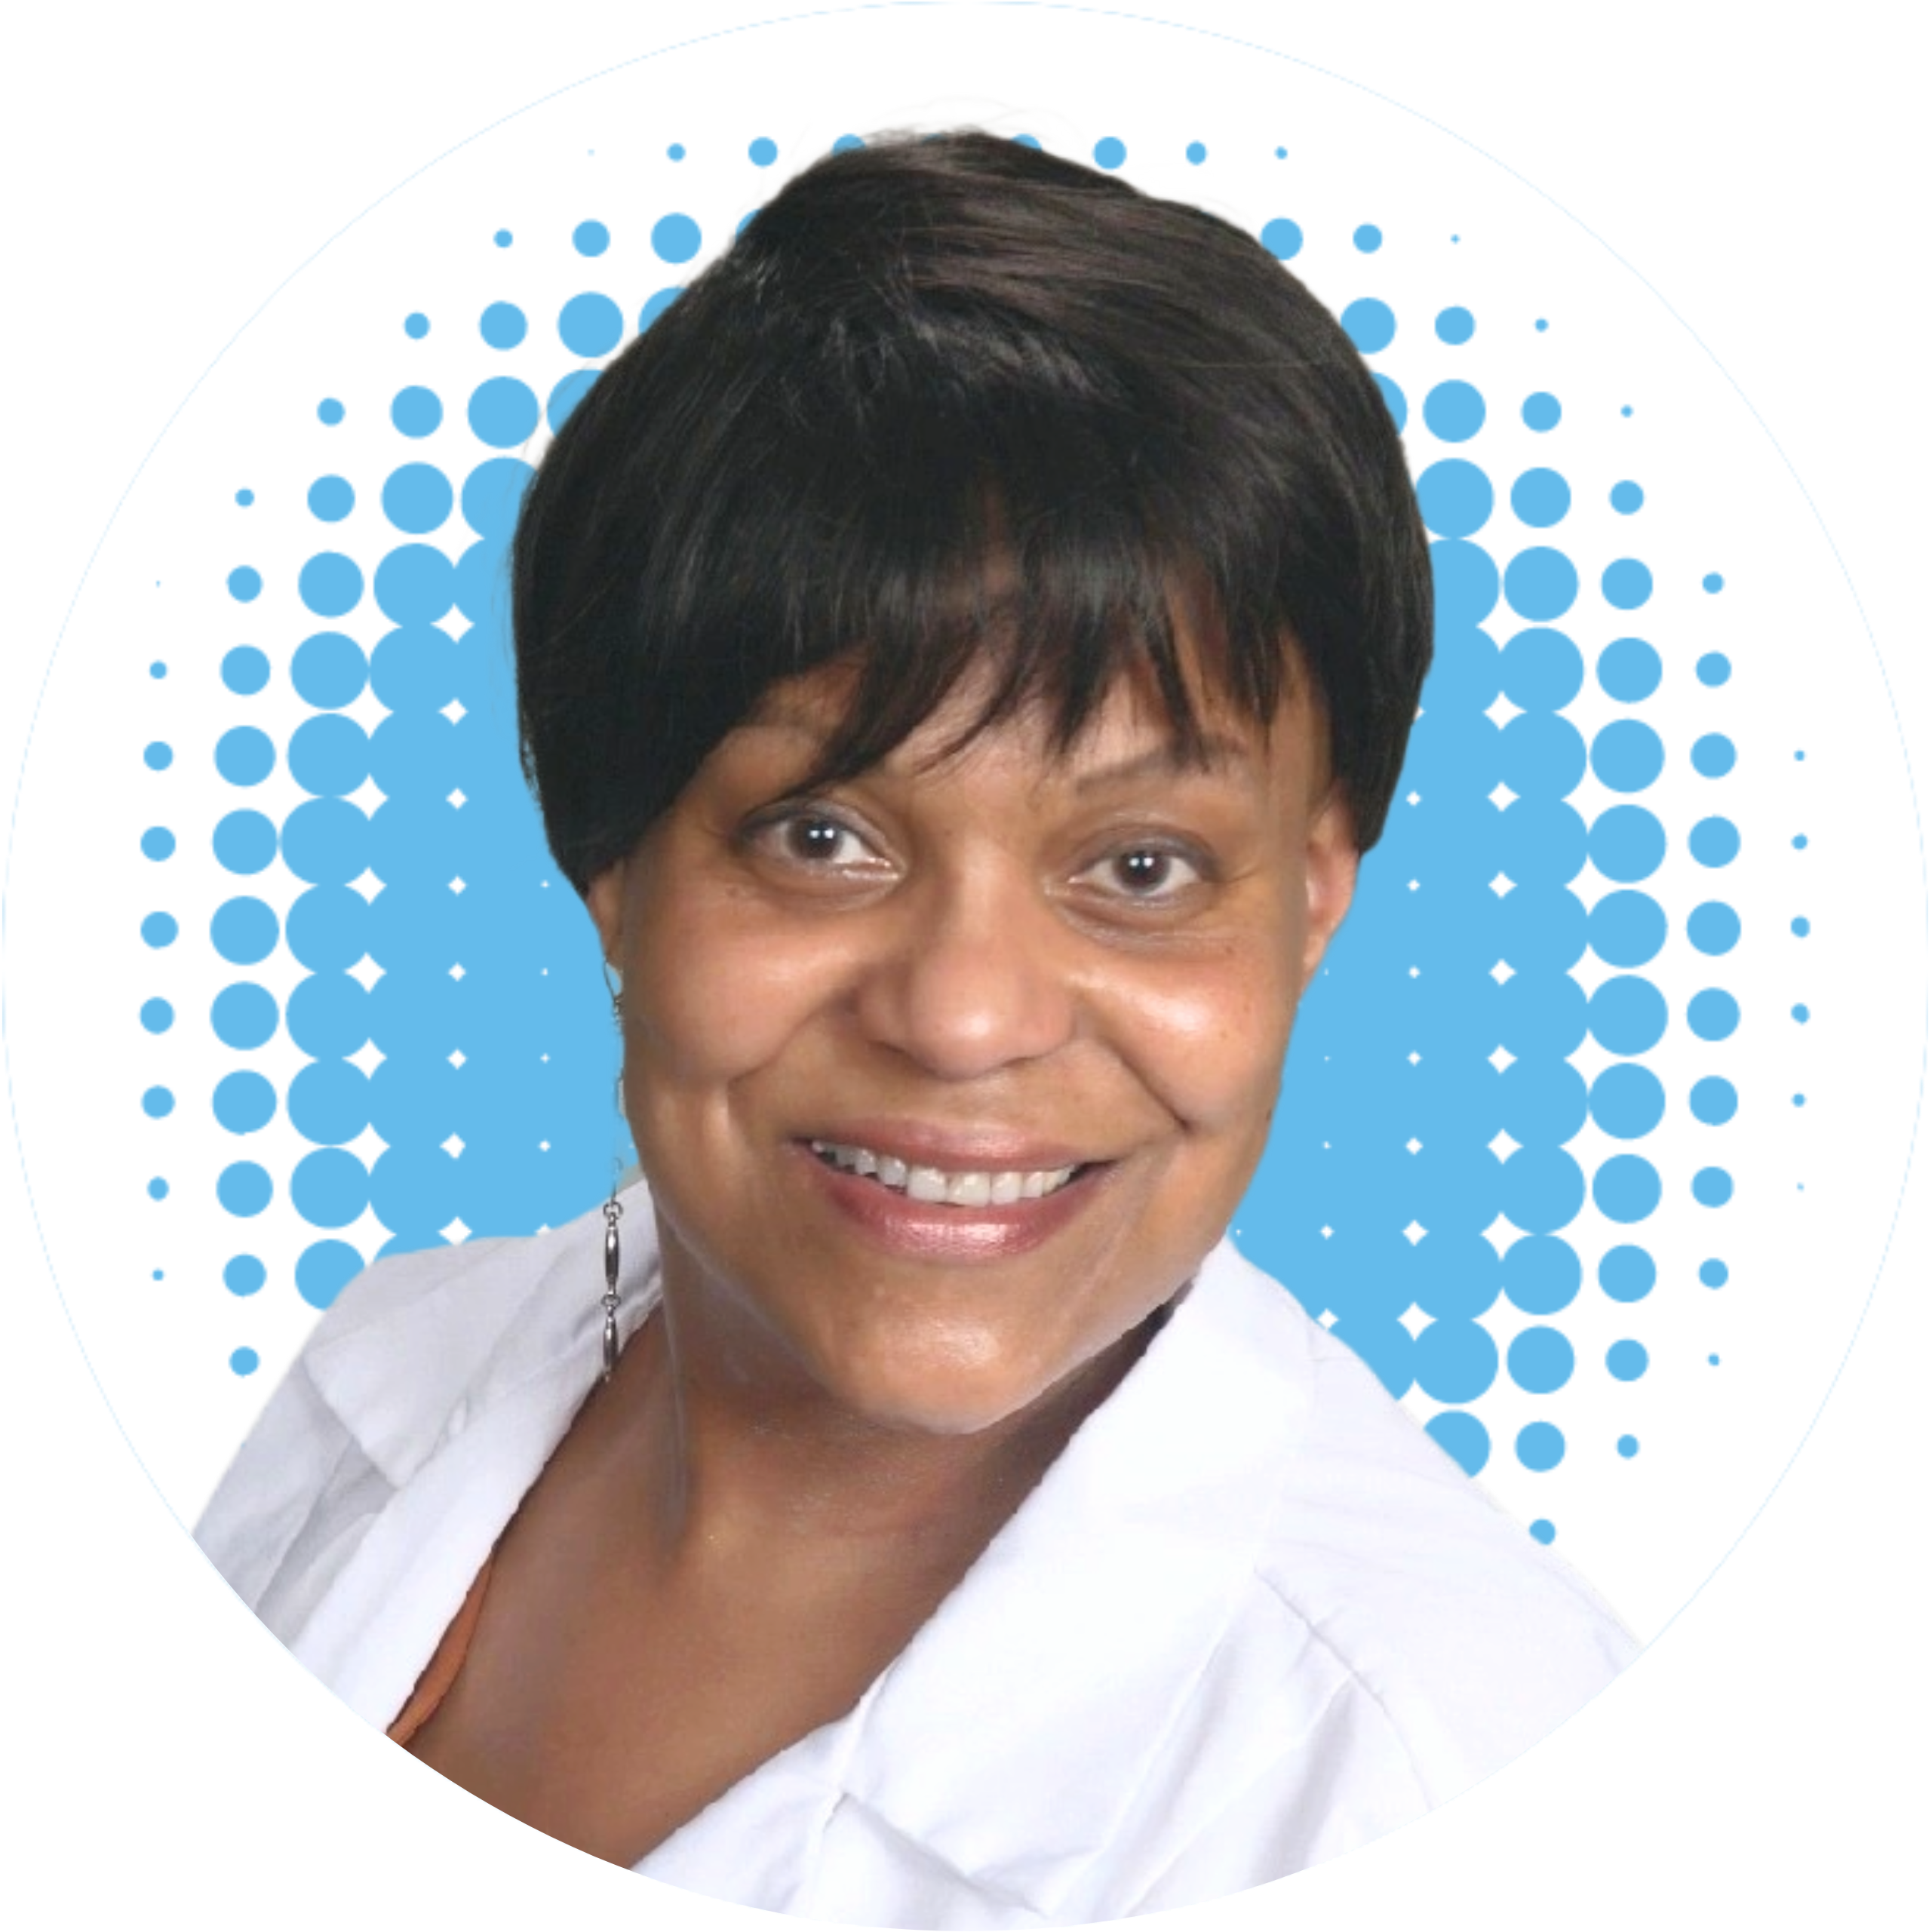 Dr. Natasha Stinson in a white coat smiles in front of a blue polka dot background